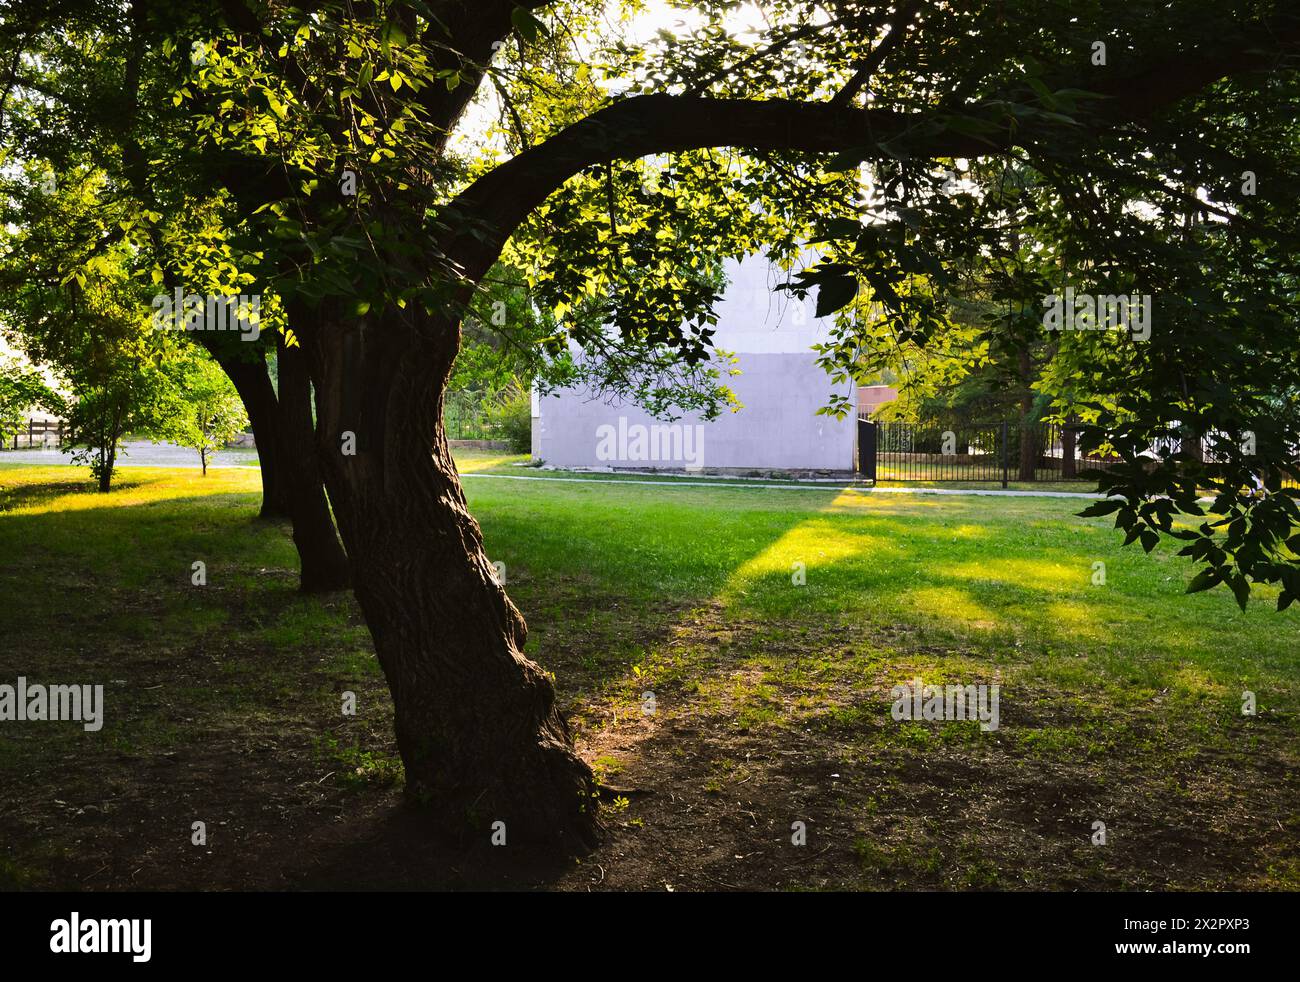 Curved tree trunk in the shade in the park on a green grassy lawn under sunny evening light Stock Photo